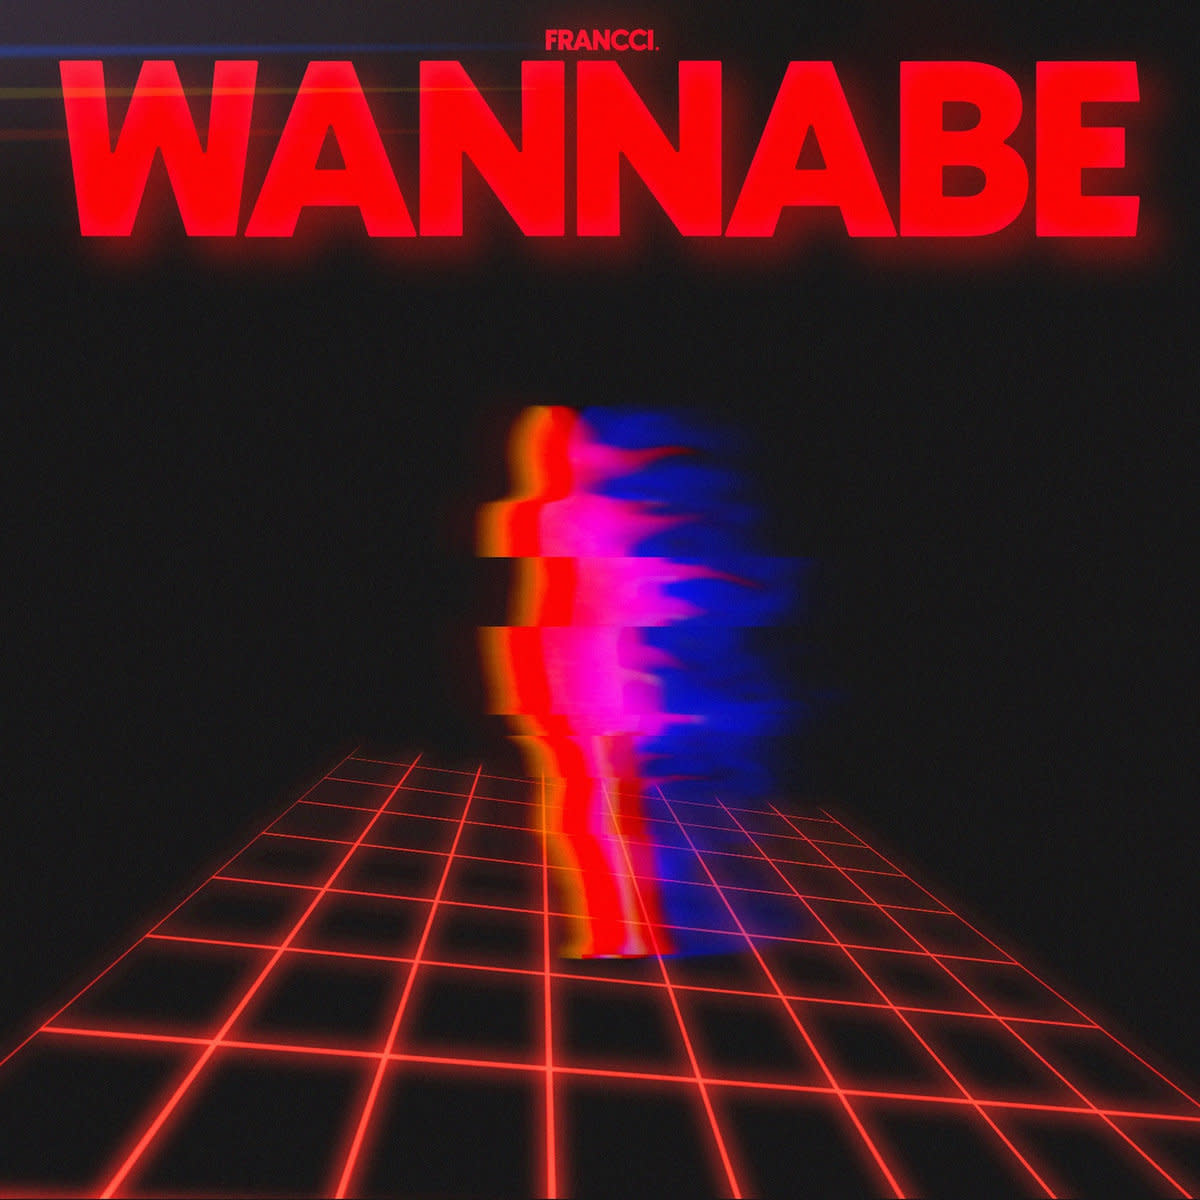 synth-single-review-wannabee-by-francci